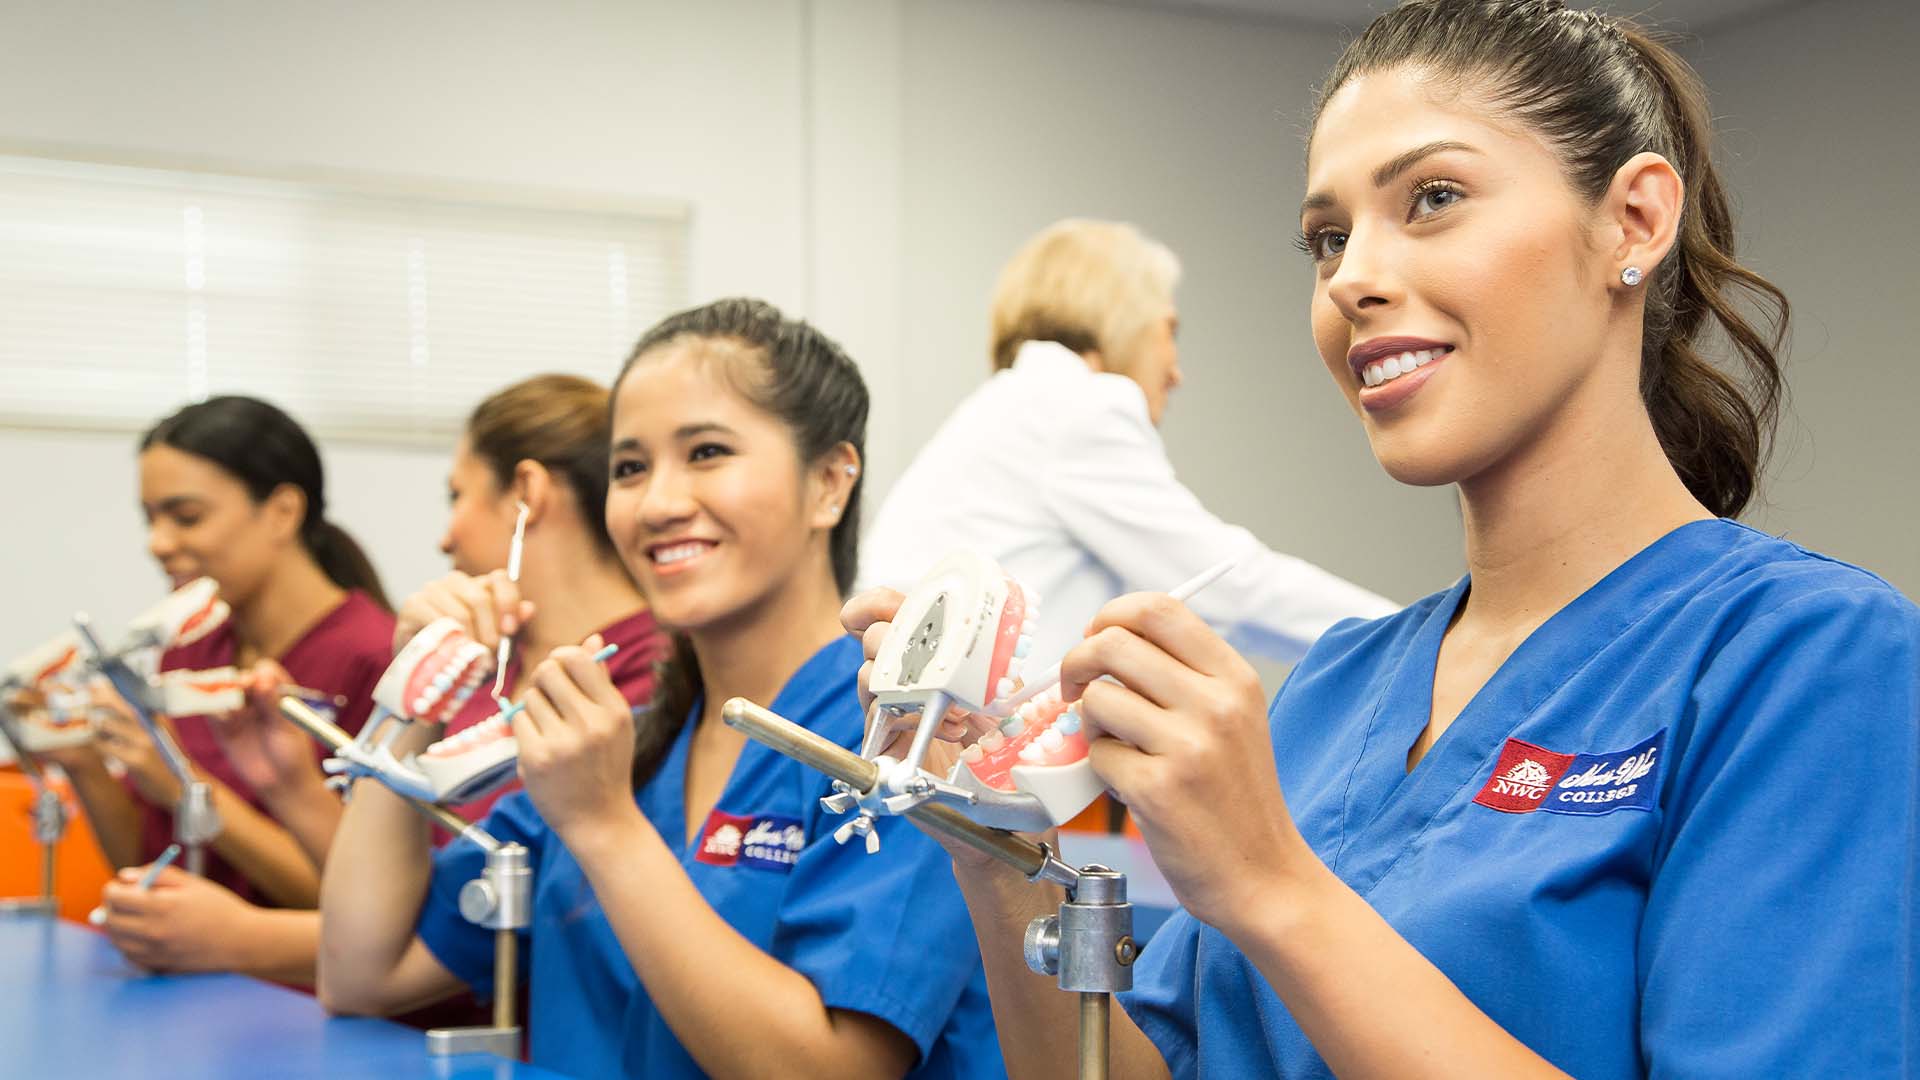 Dental Assistant Training Courses Classes And Programs Online School For Dental Assistants